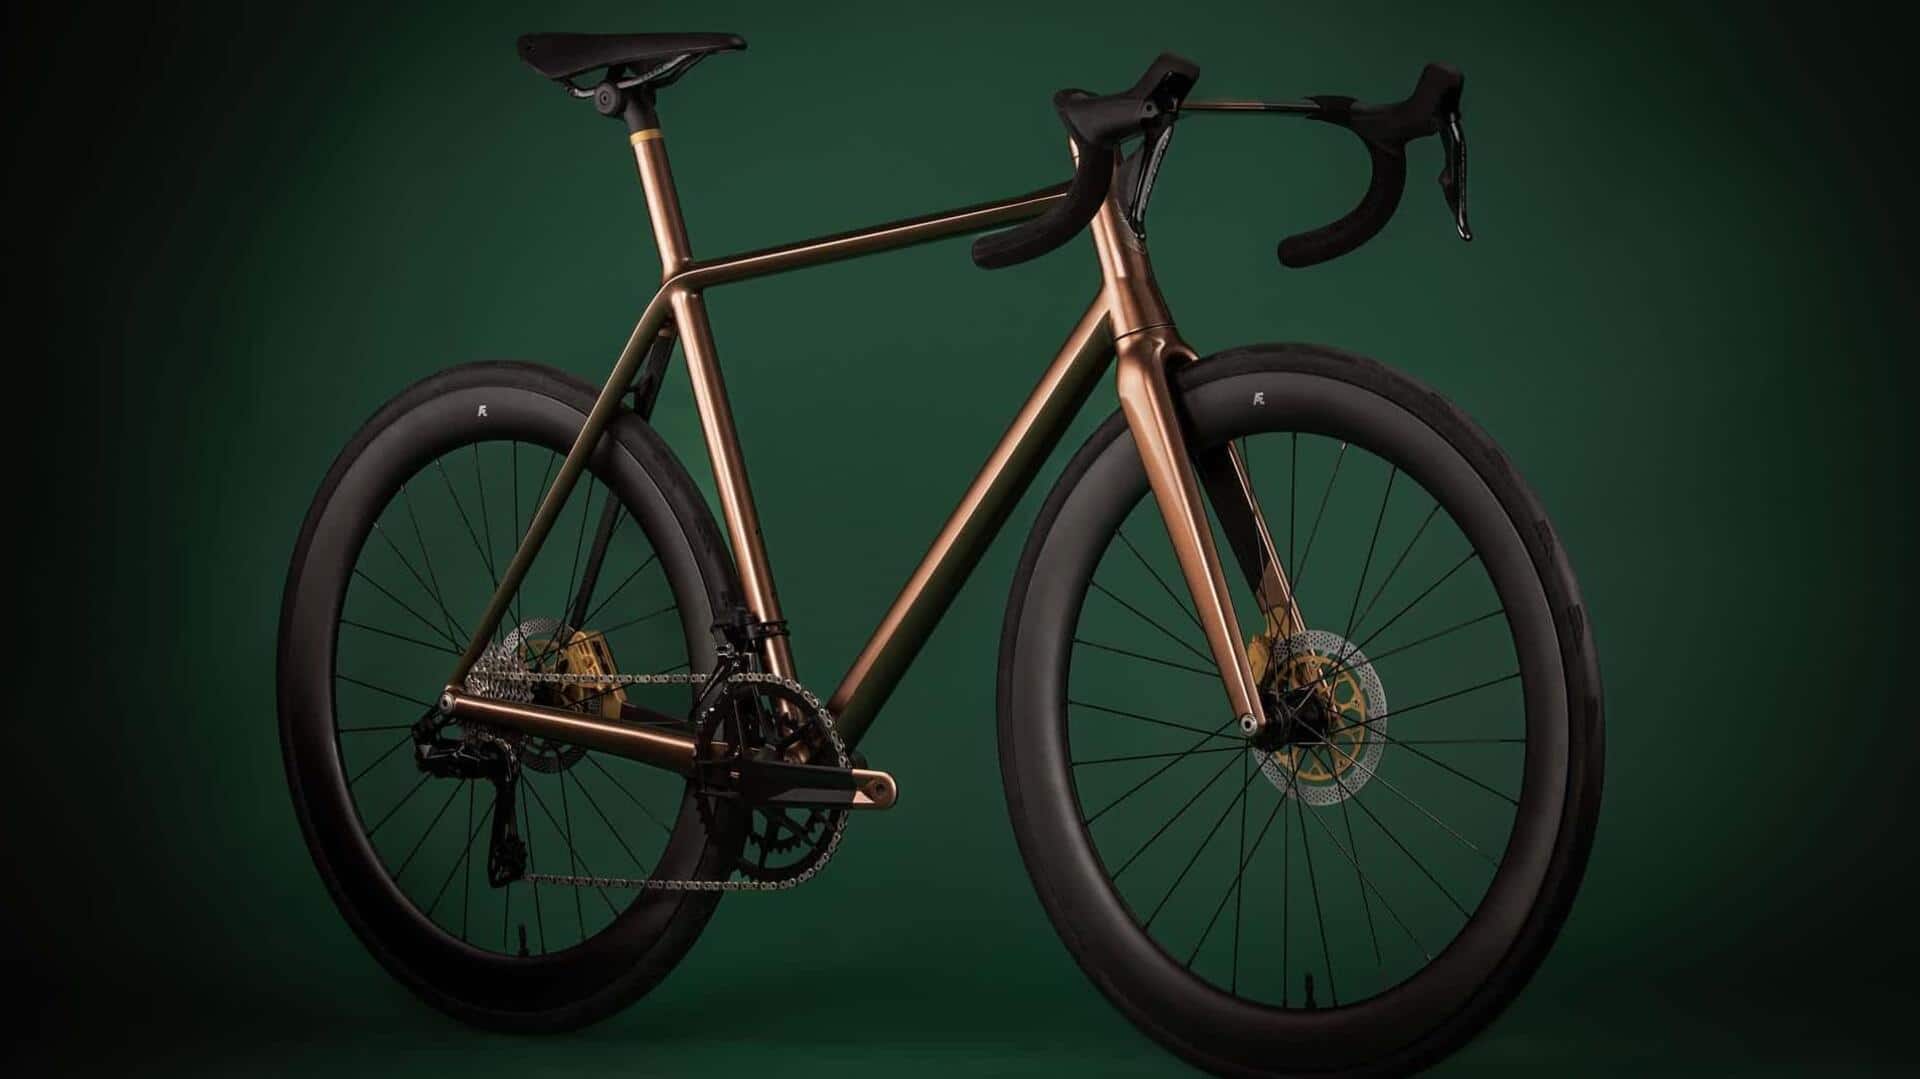 Aston Martin and J.Laverack unveil the .1R bicycle: Check features